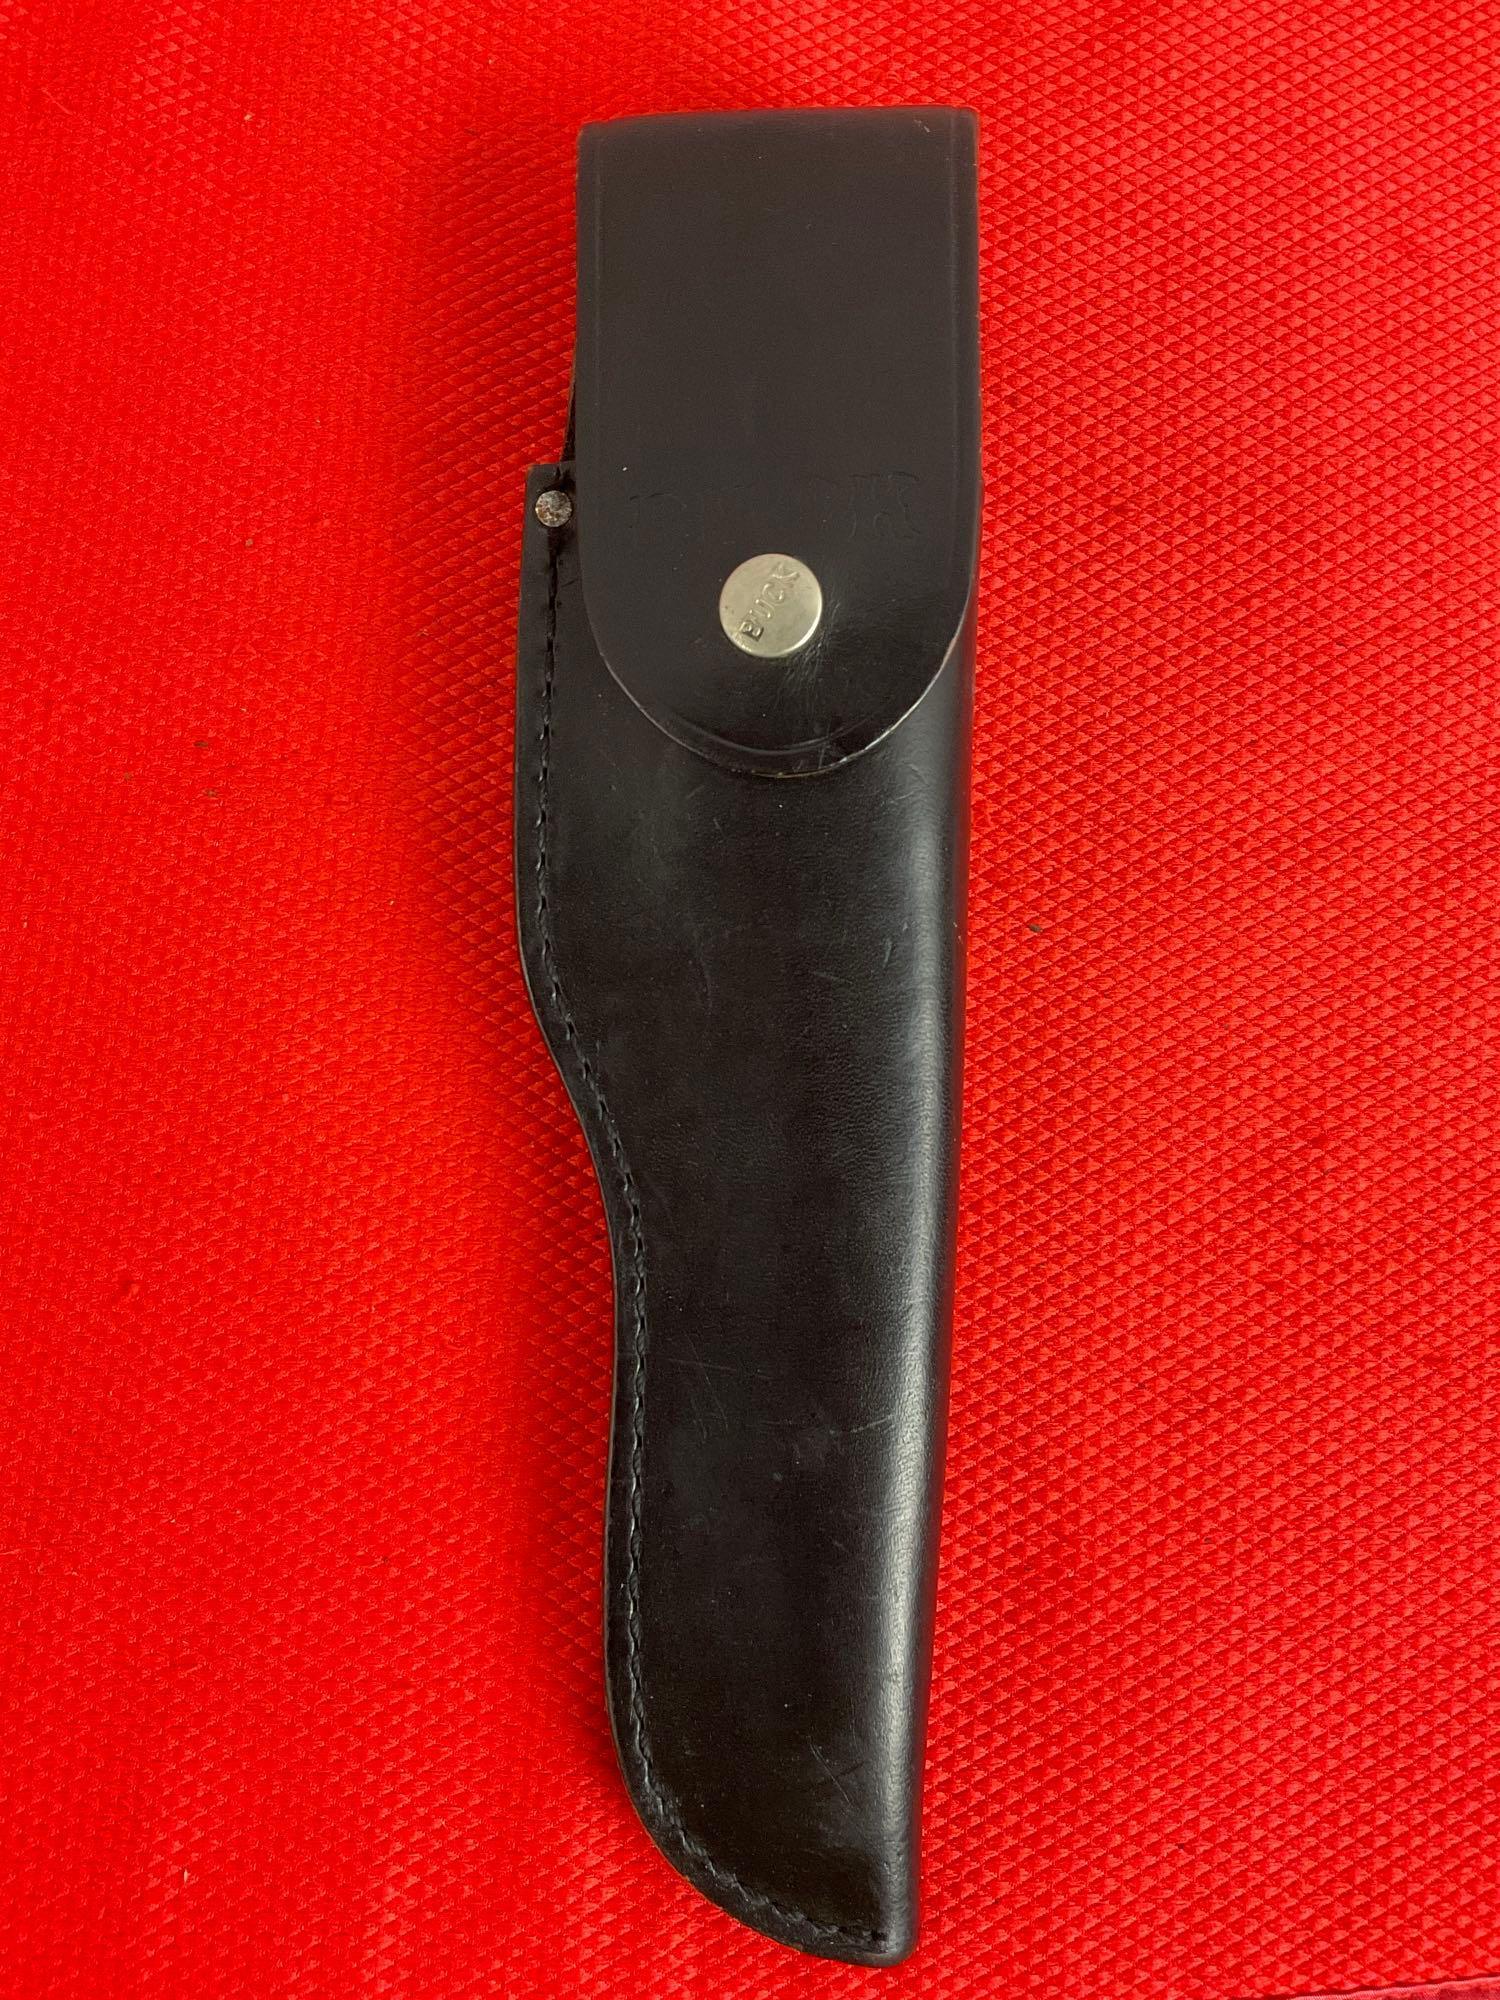 Vintage Buck 6" Steel Fixed Blade Bowie Knife Model 119 w/ Leather Sheath & Composite Handle. See